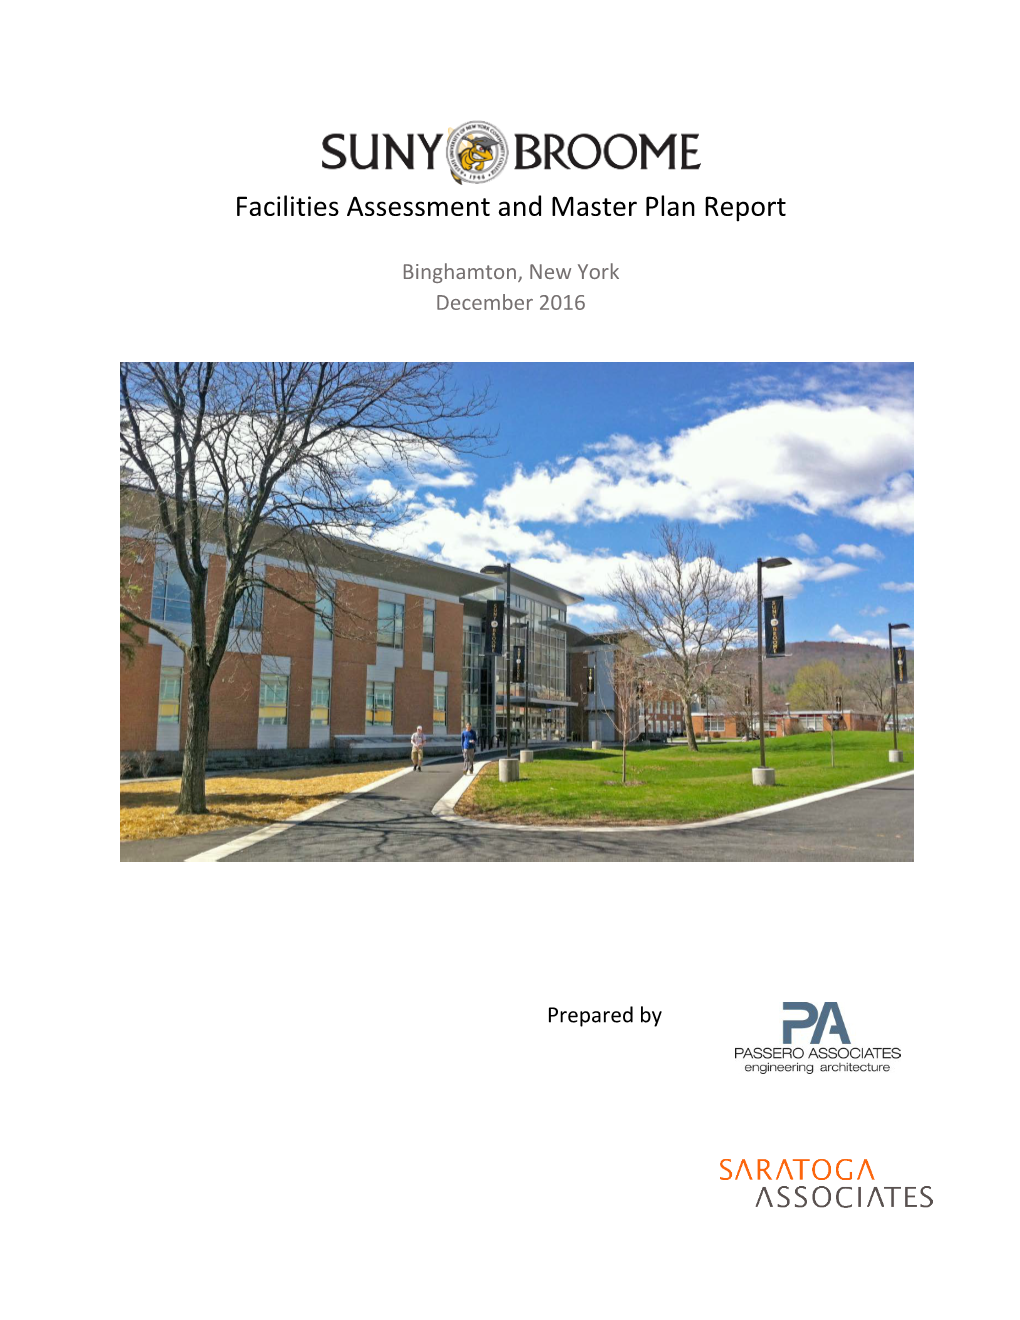 SUNY Broome Facilities Assessment and Master Plan 2016